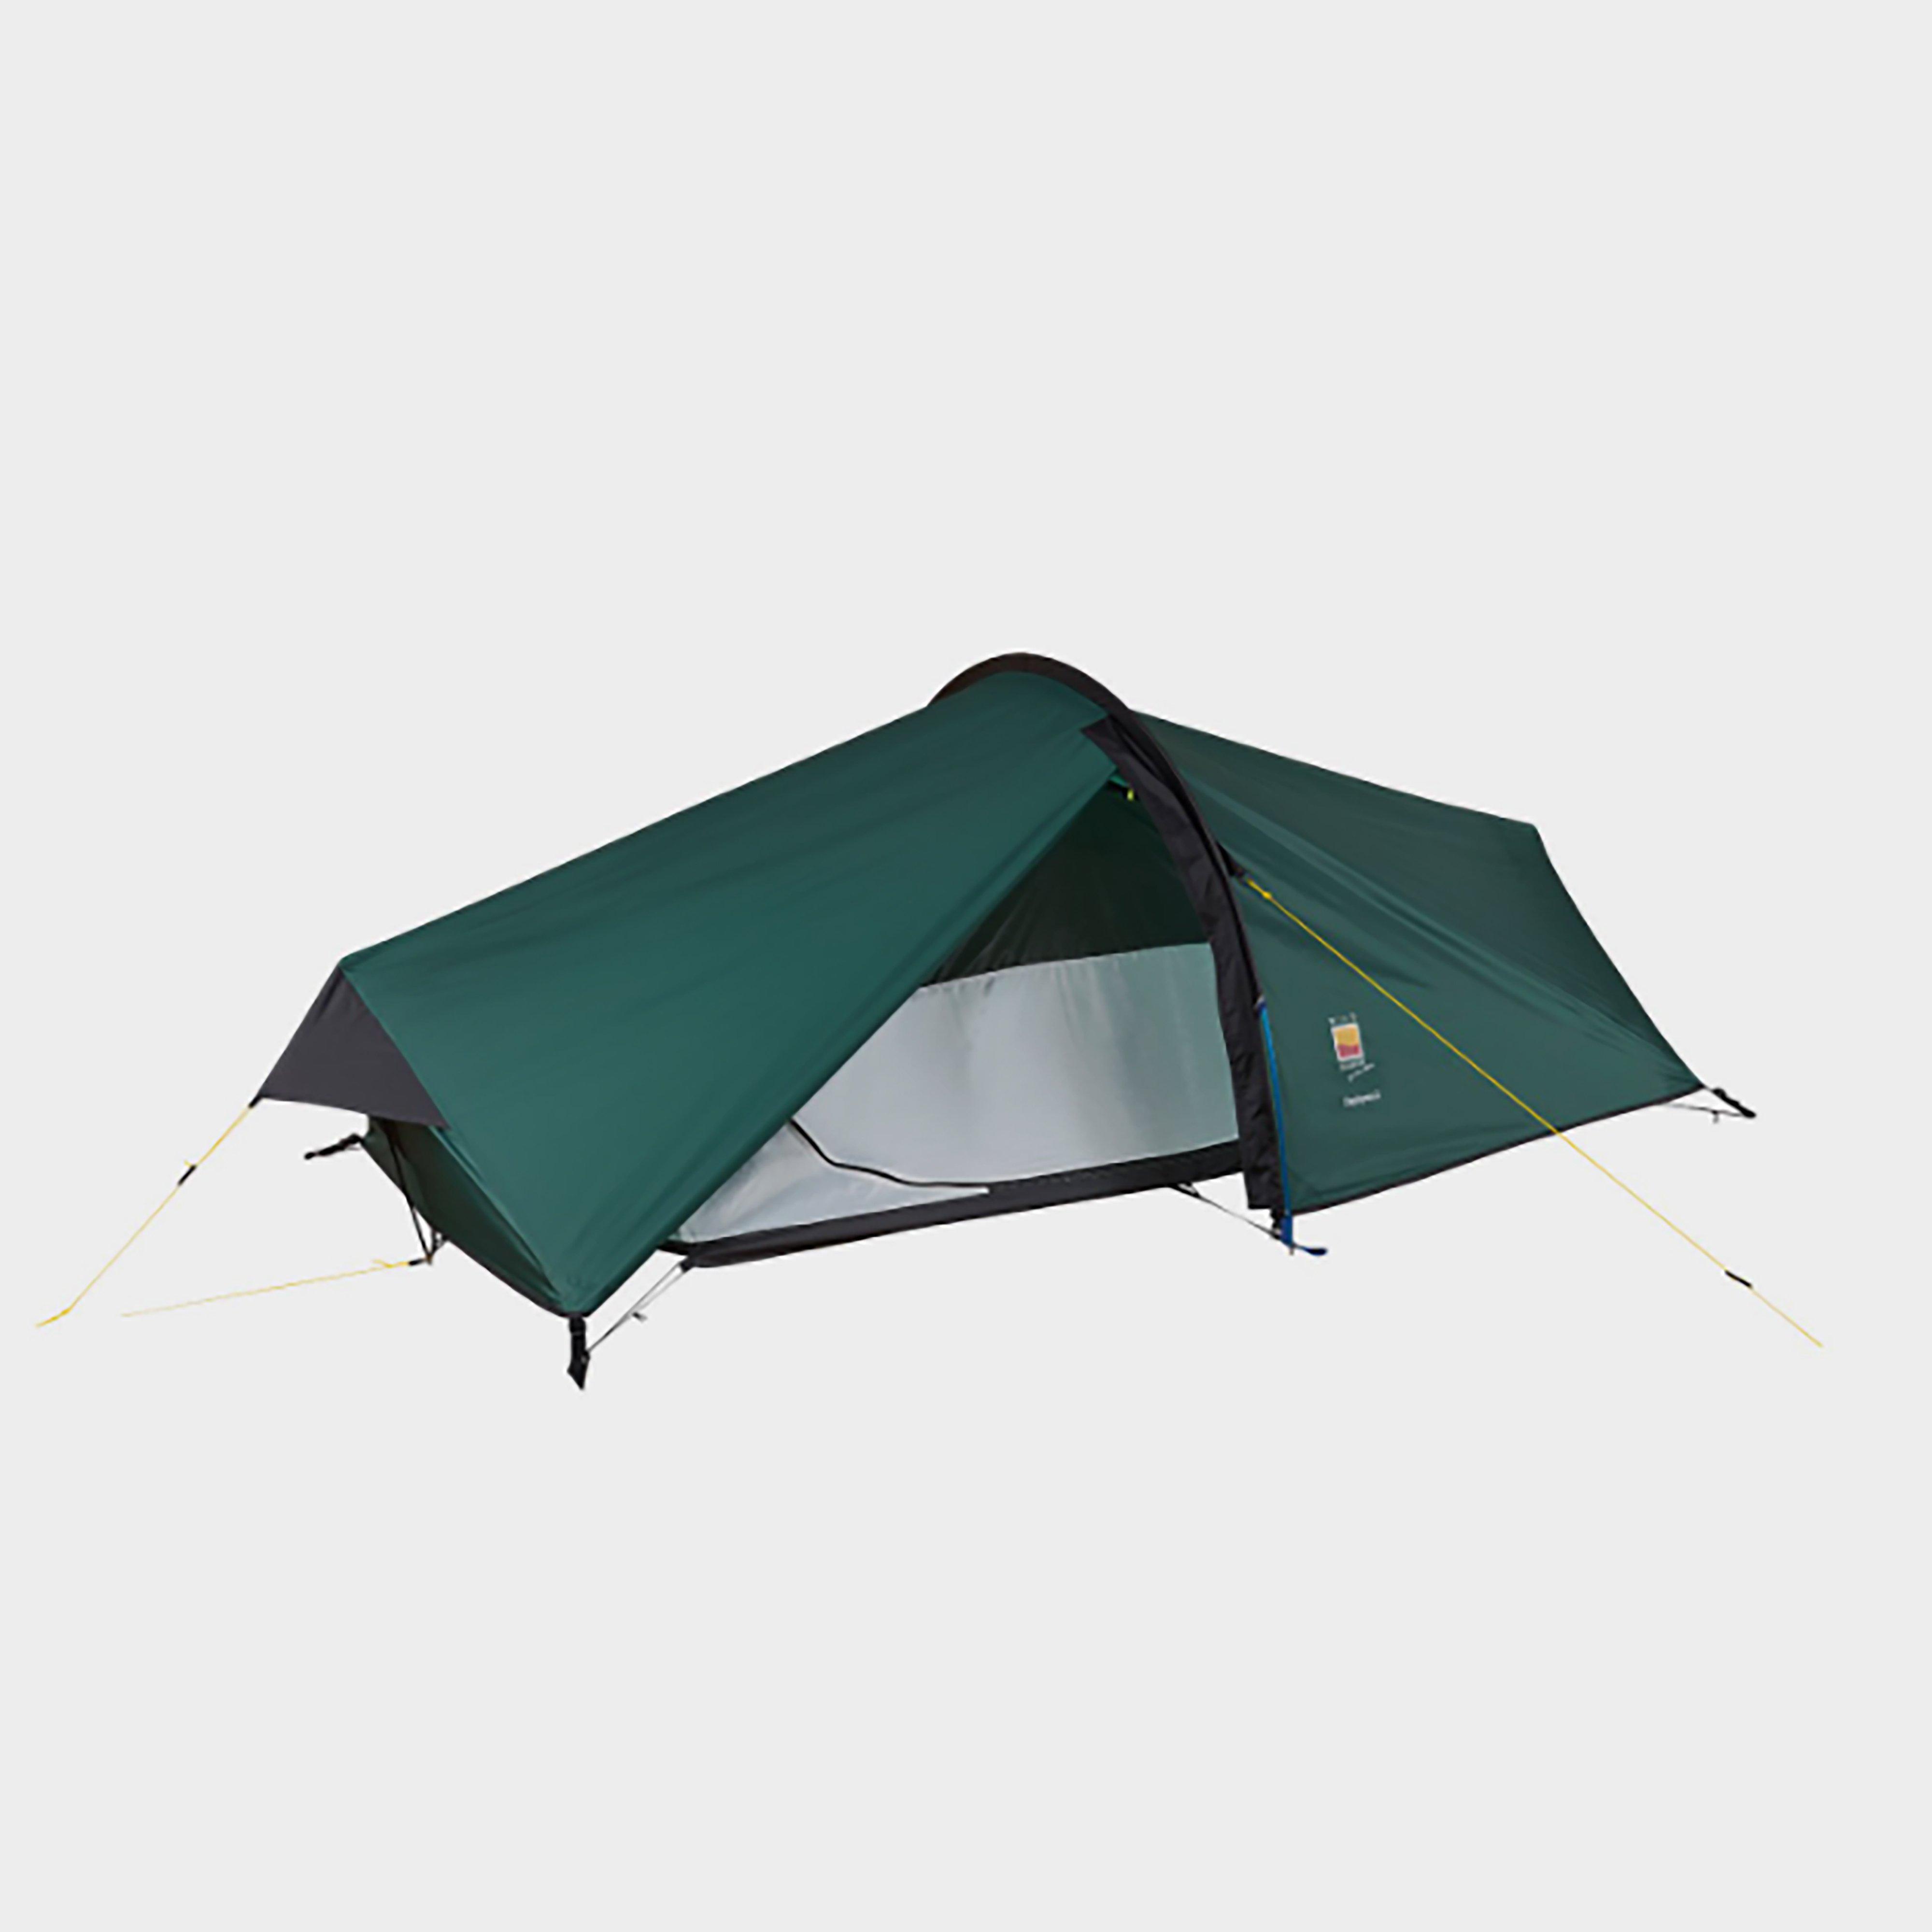  WILD COUNTRY Zephyros Compact 2 Tent, Green